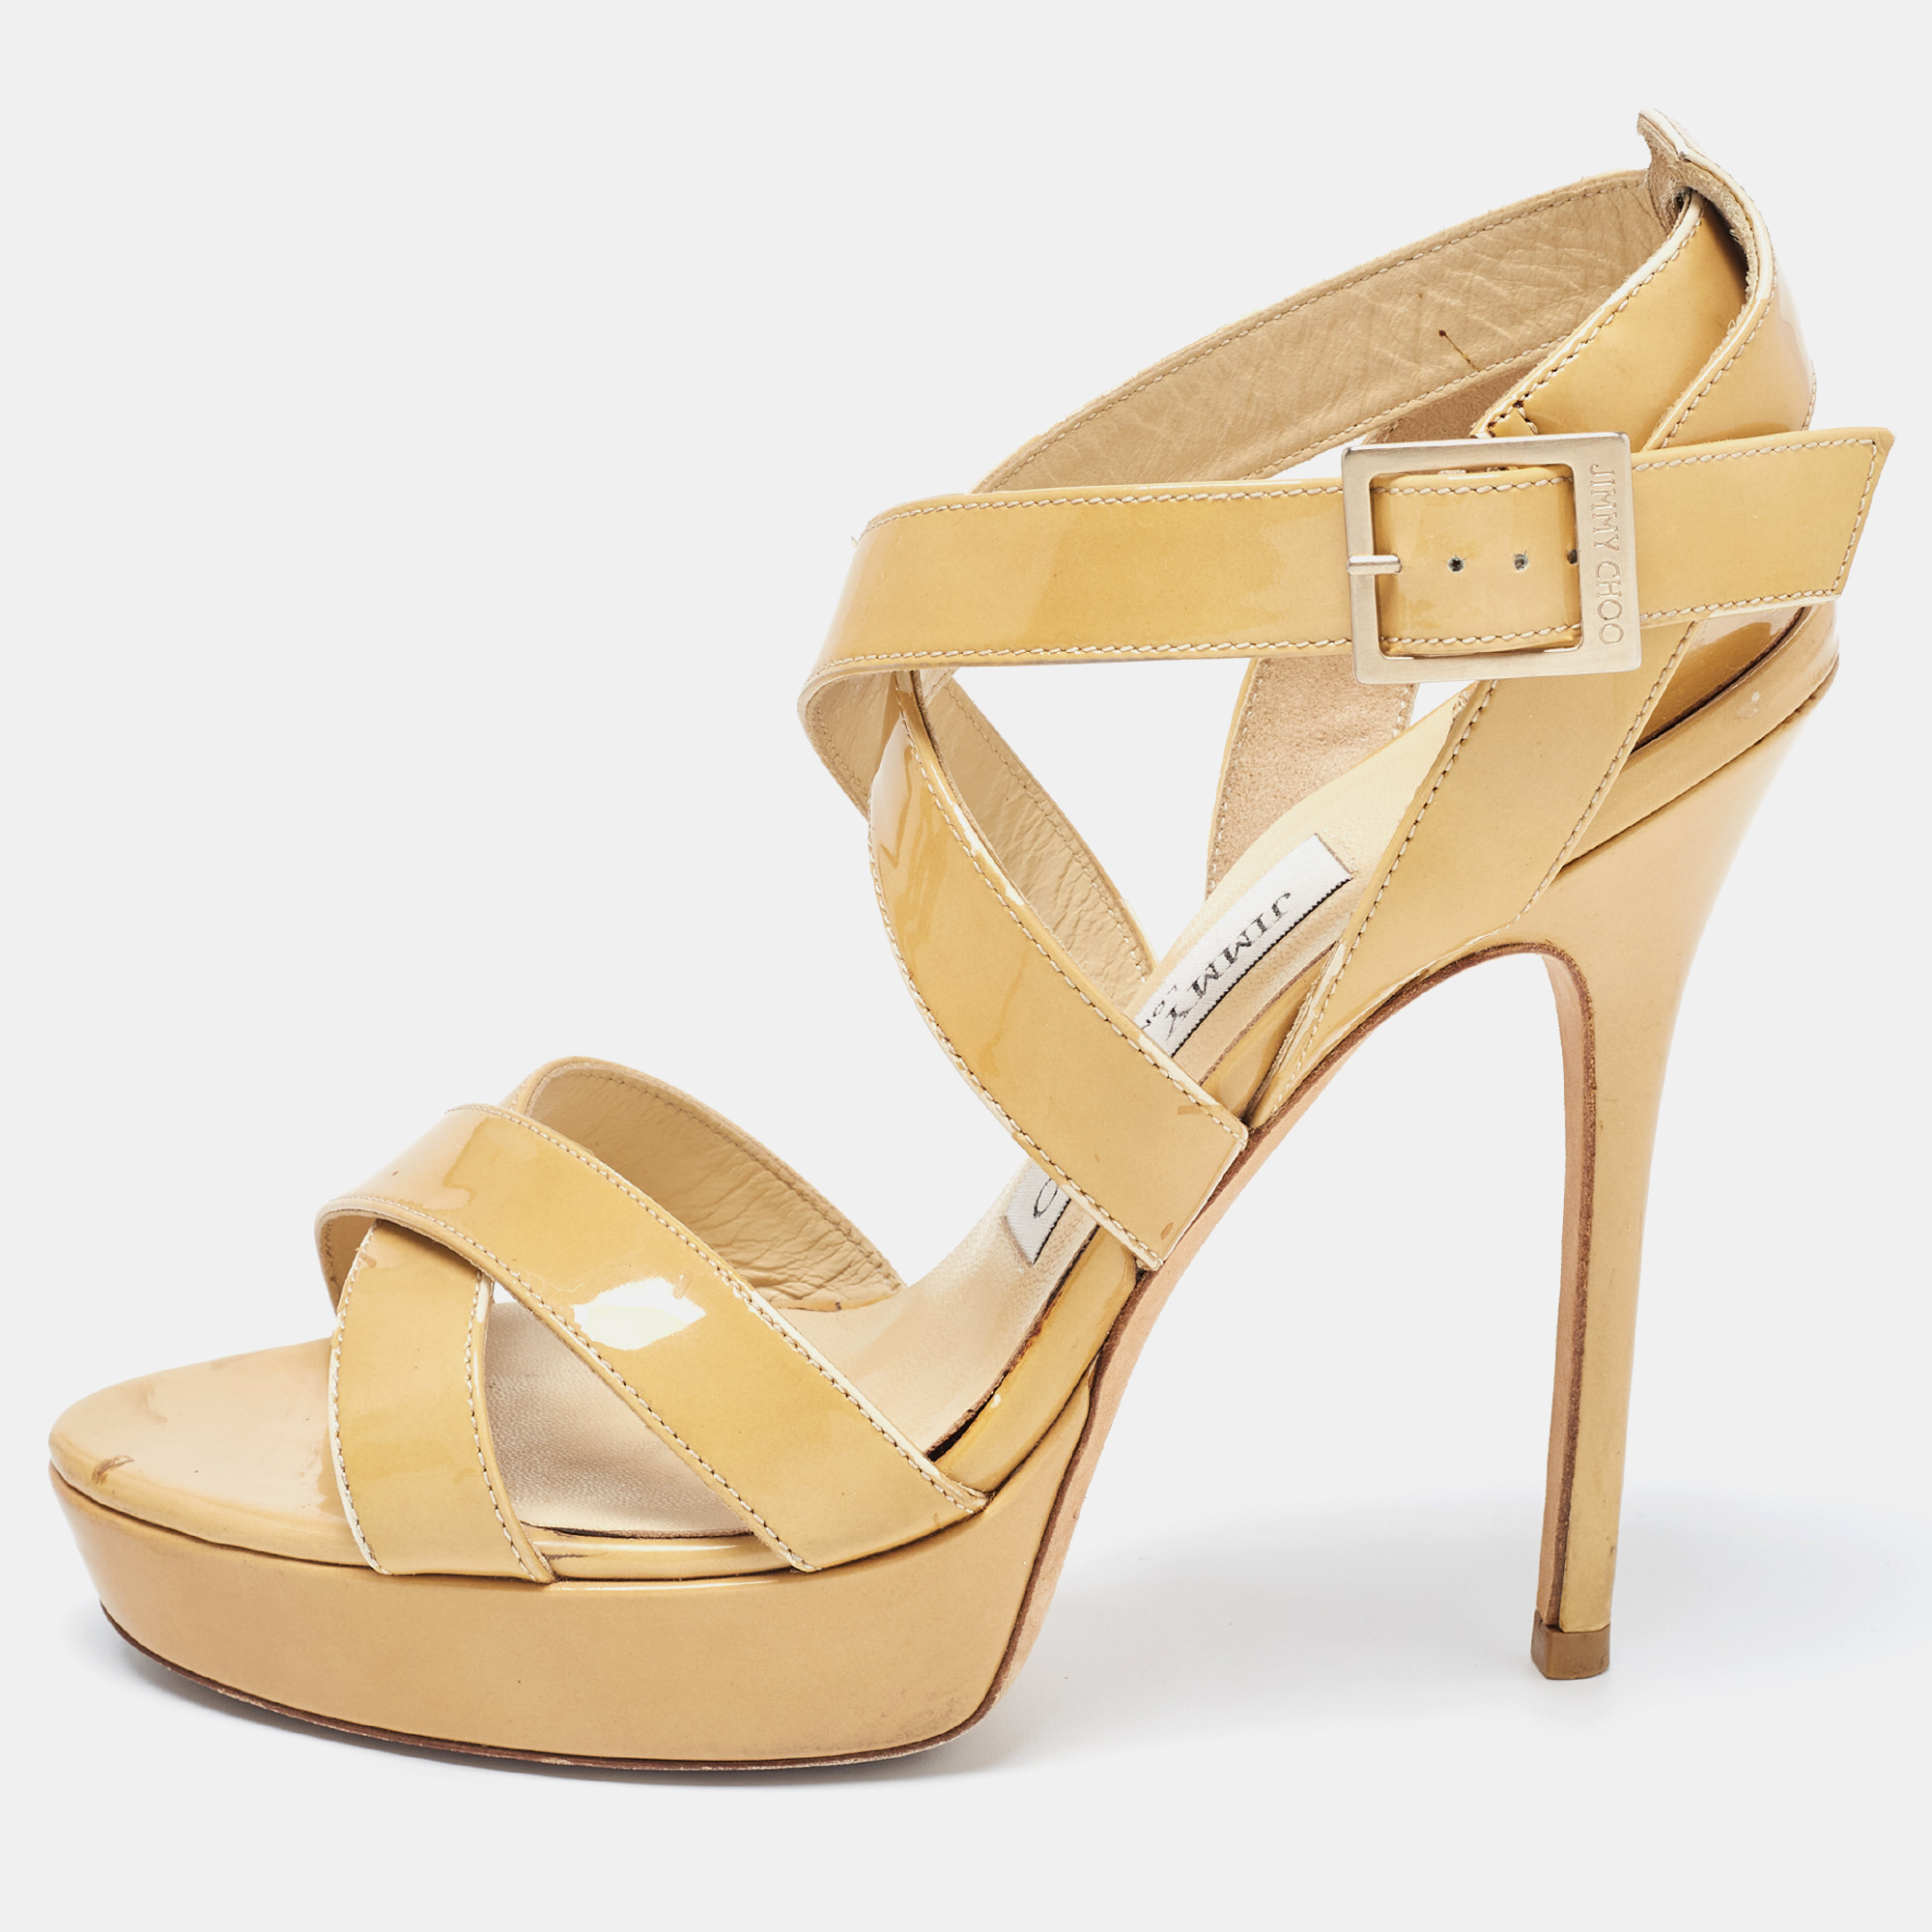 Jimmy Choo Beige Patent Leather Vamp Ankle Strap Sandals Size 37